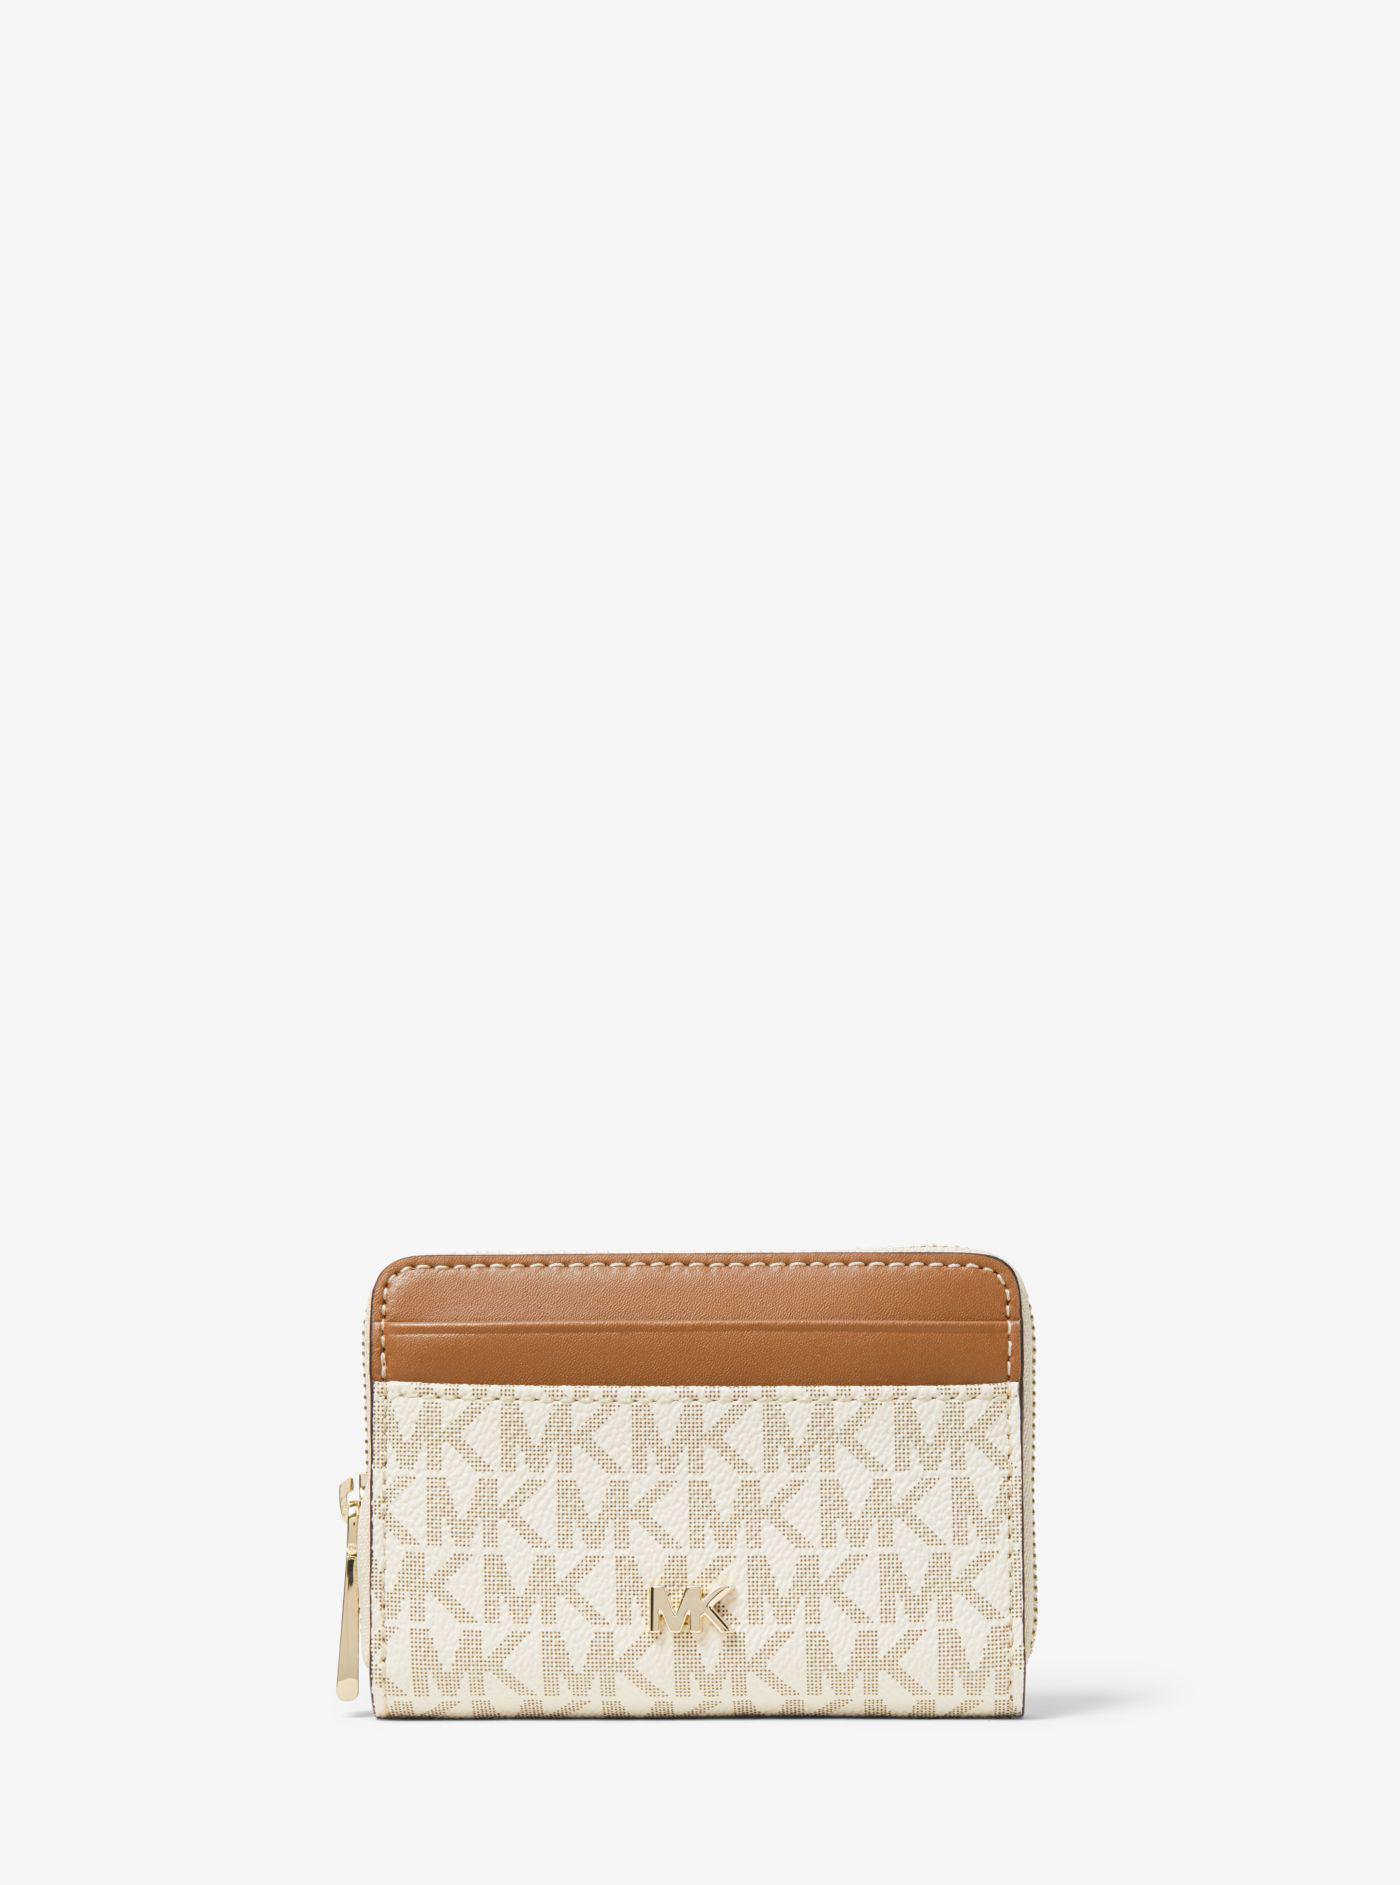 Michael Kors Small Logo And Leather Wallet in Brown | Lyst